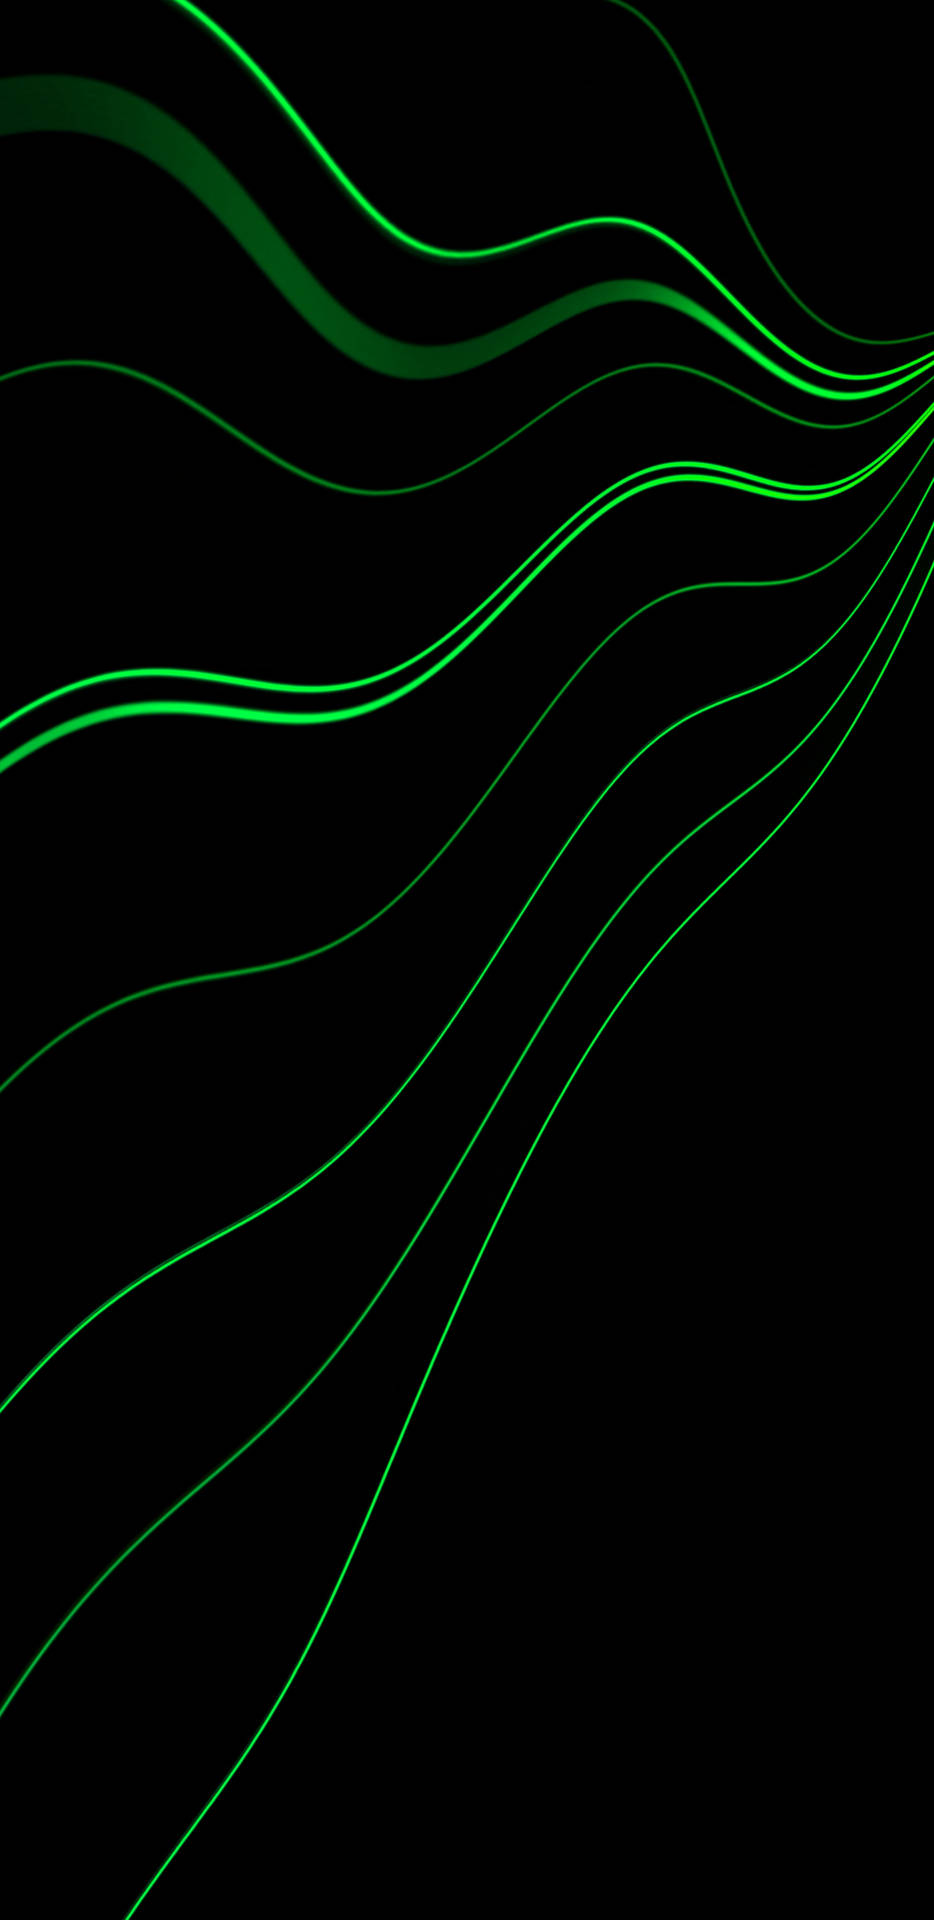 Black And Green Wavy Lines Wallpaper